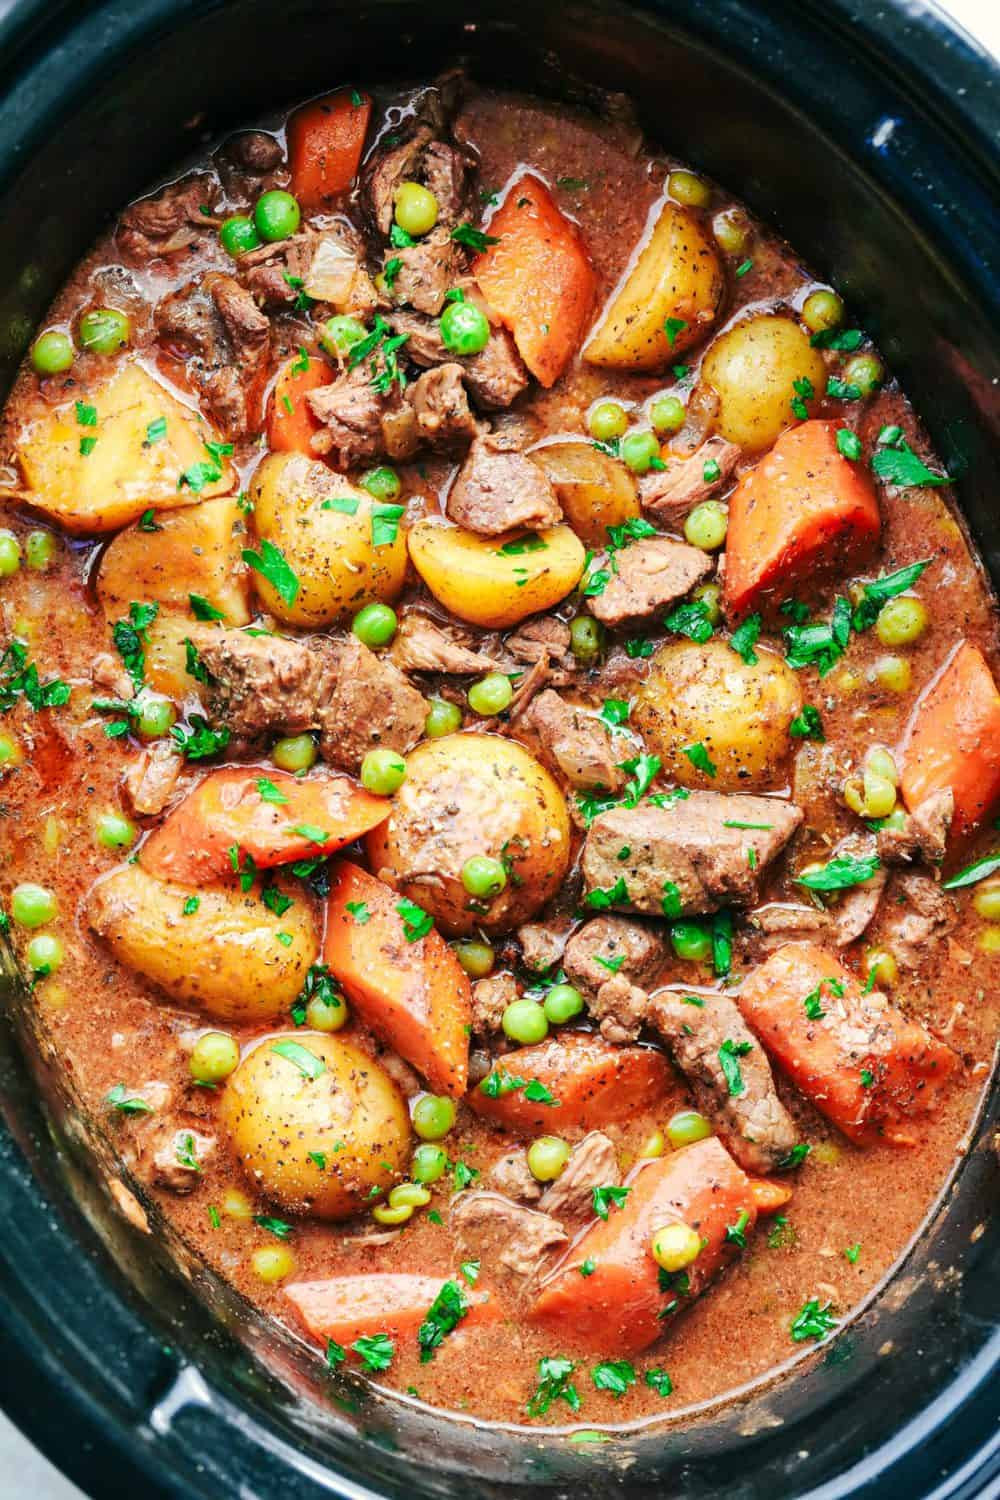 Lamb Stew Recipes Slow Cooker
 Best Ever Slow Cooker Beef Stew